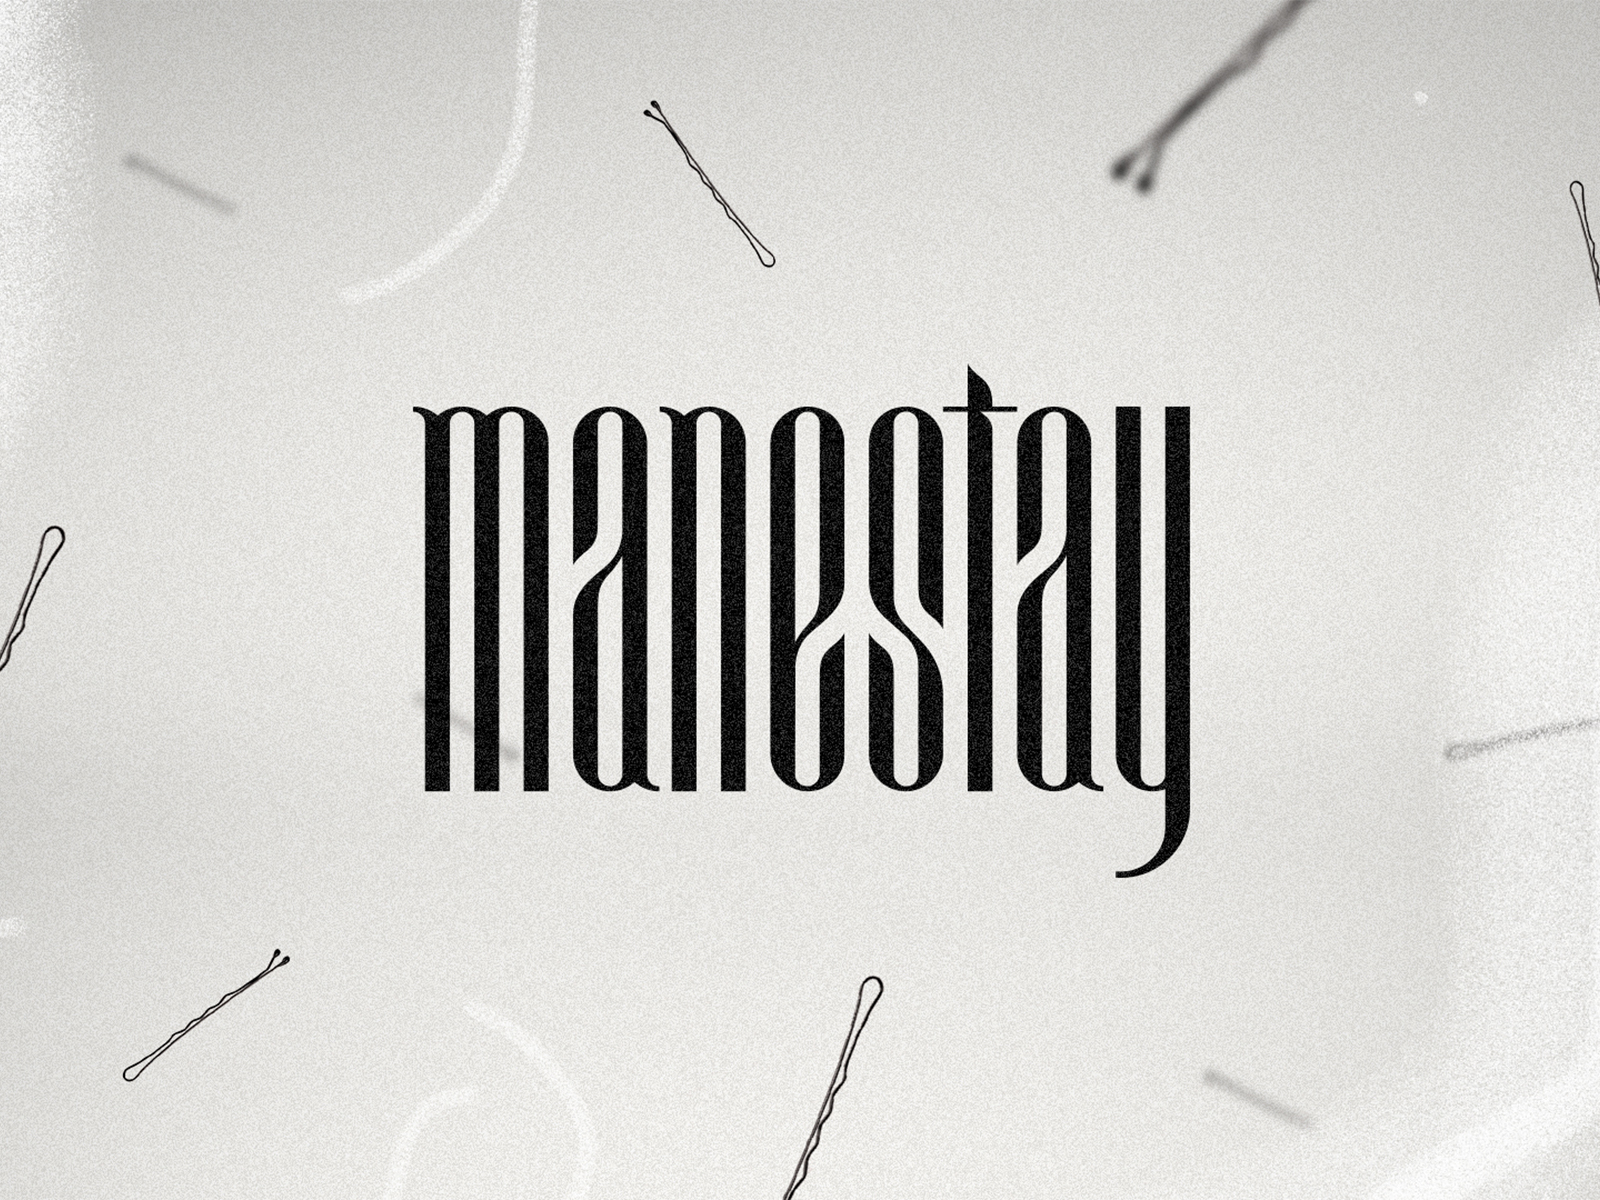 Manestay Logotype By Nico Guidicessi For Hype Group On Dribbble